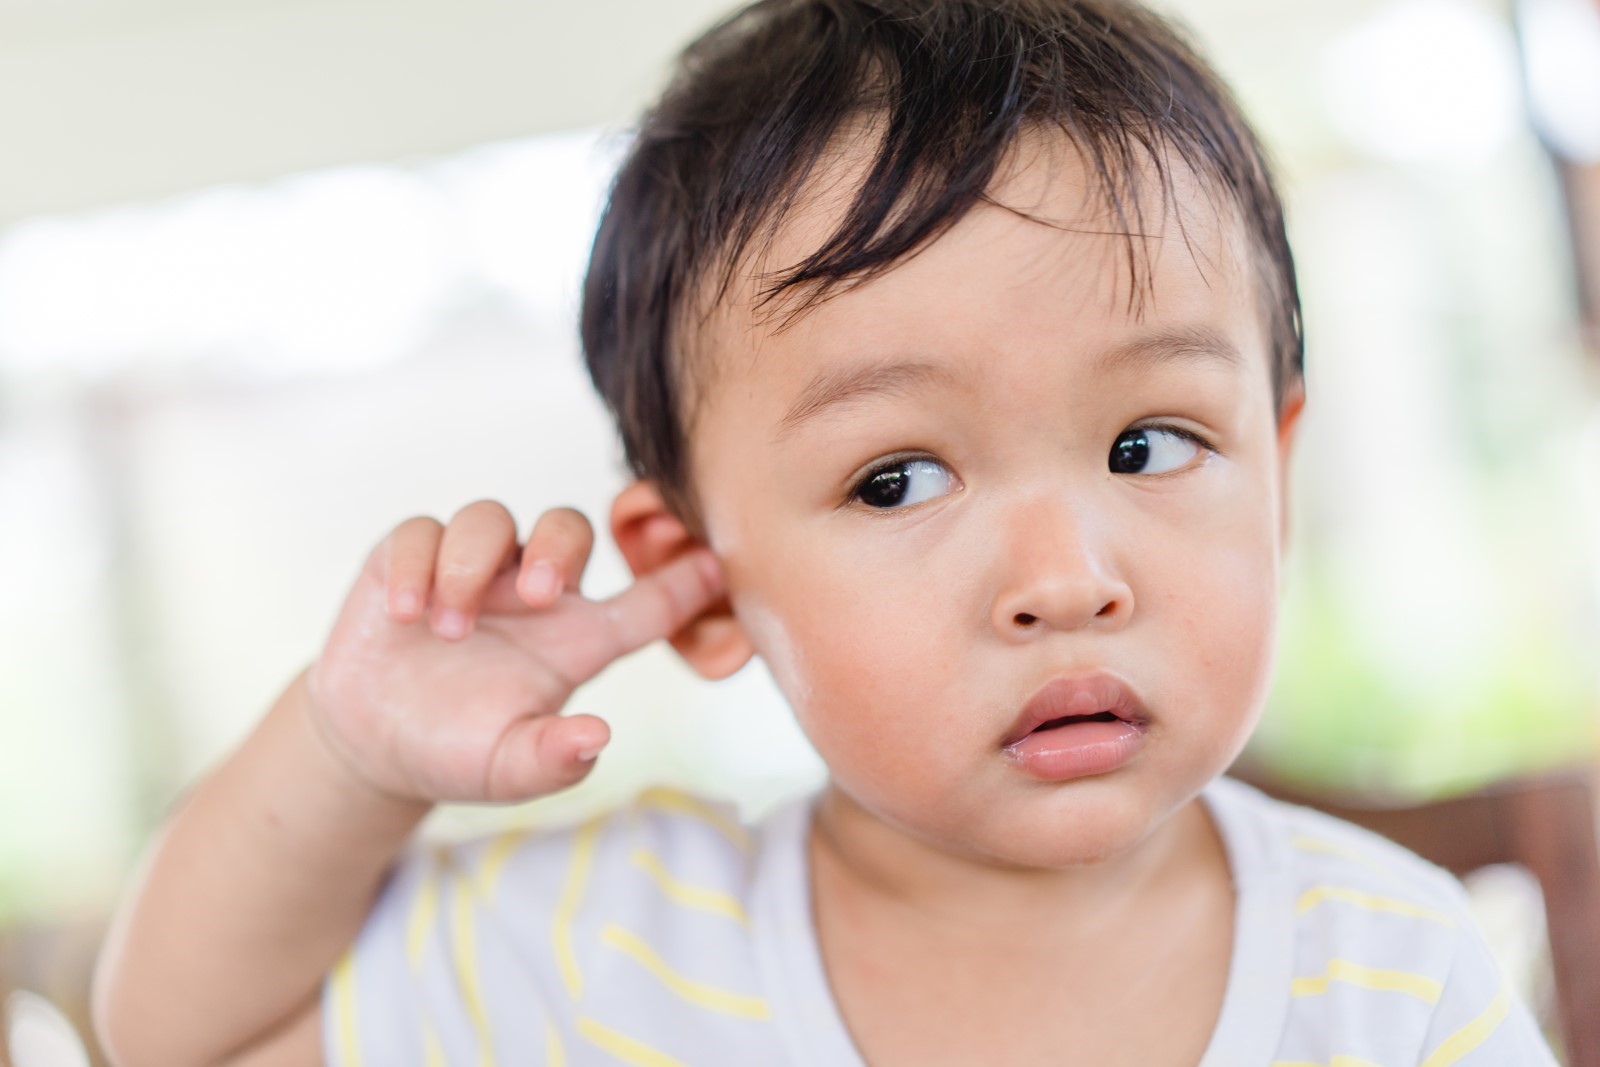 Child With Ear Infection